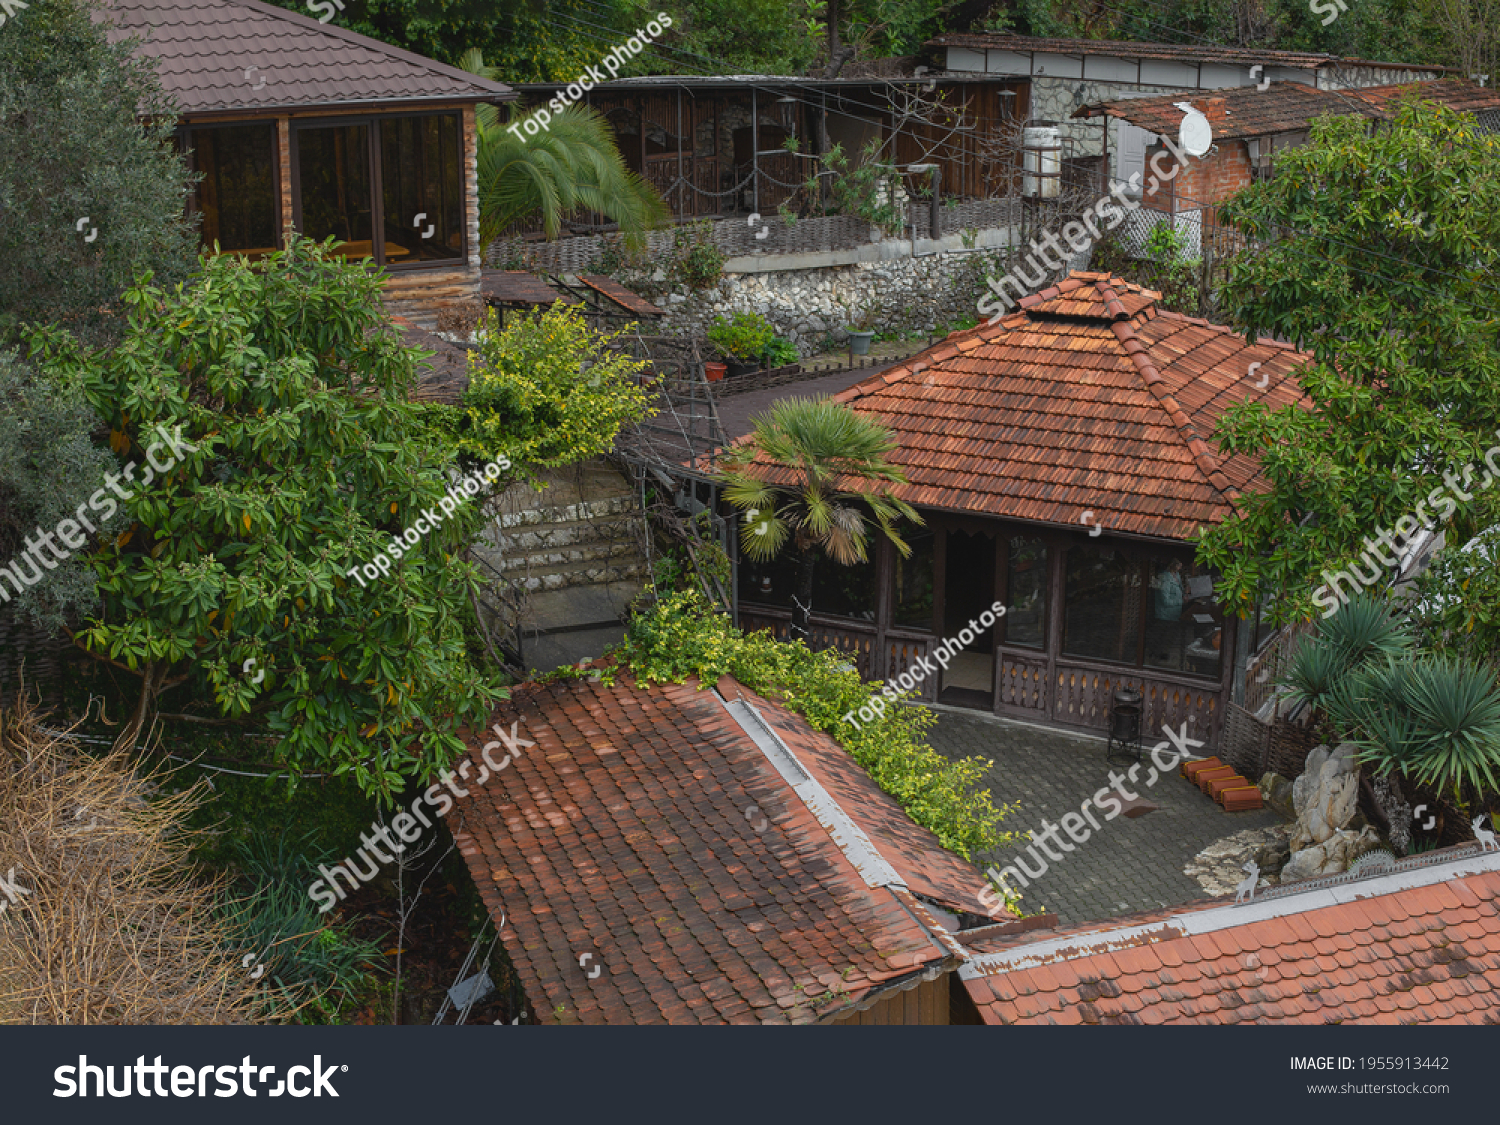 View of the old houses with red tiled roofs and green trees. Old garden with palm and other plants. Abandoned buildings. Shack. Hovel. #1955913442